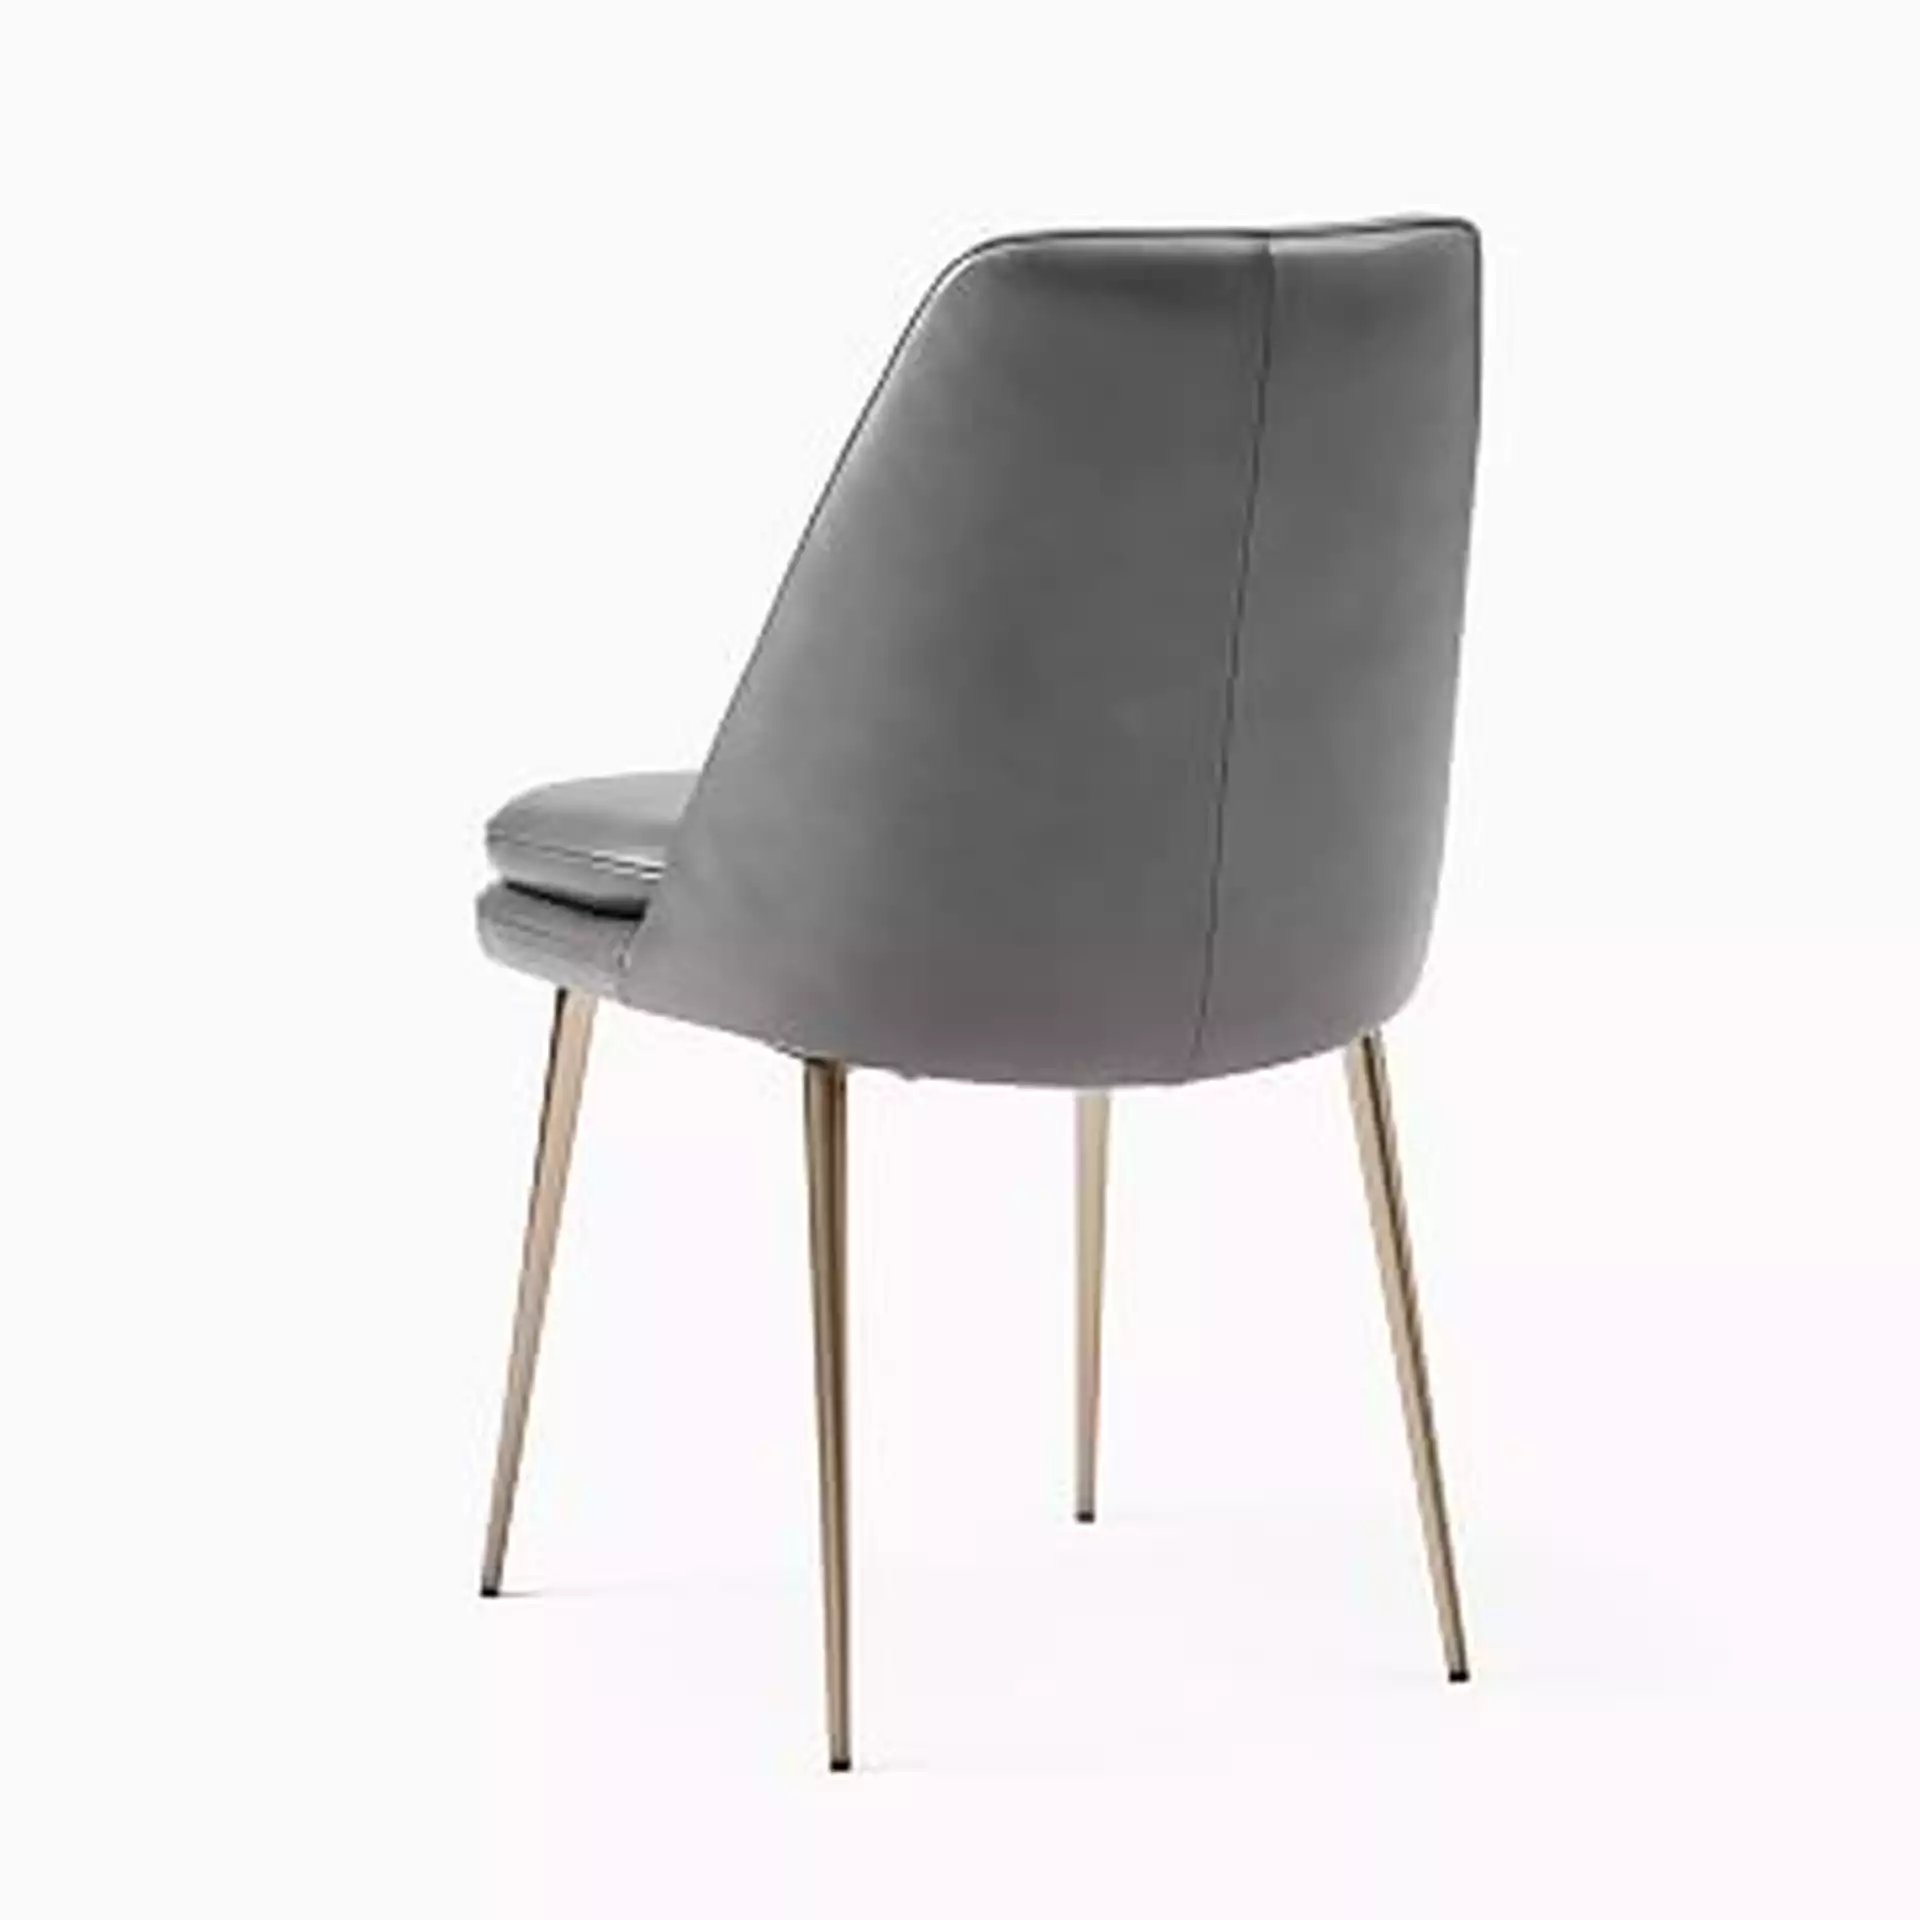 Finley Low Back Dining Chair, Vegan Leather, Cinder, Light Bronze